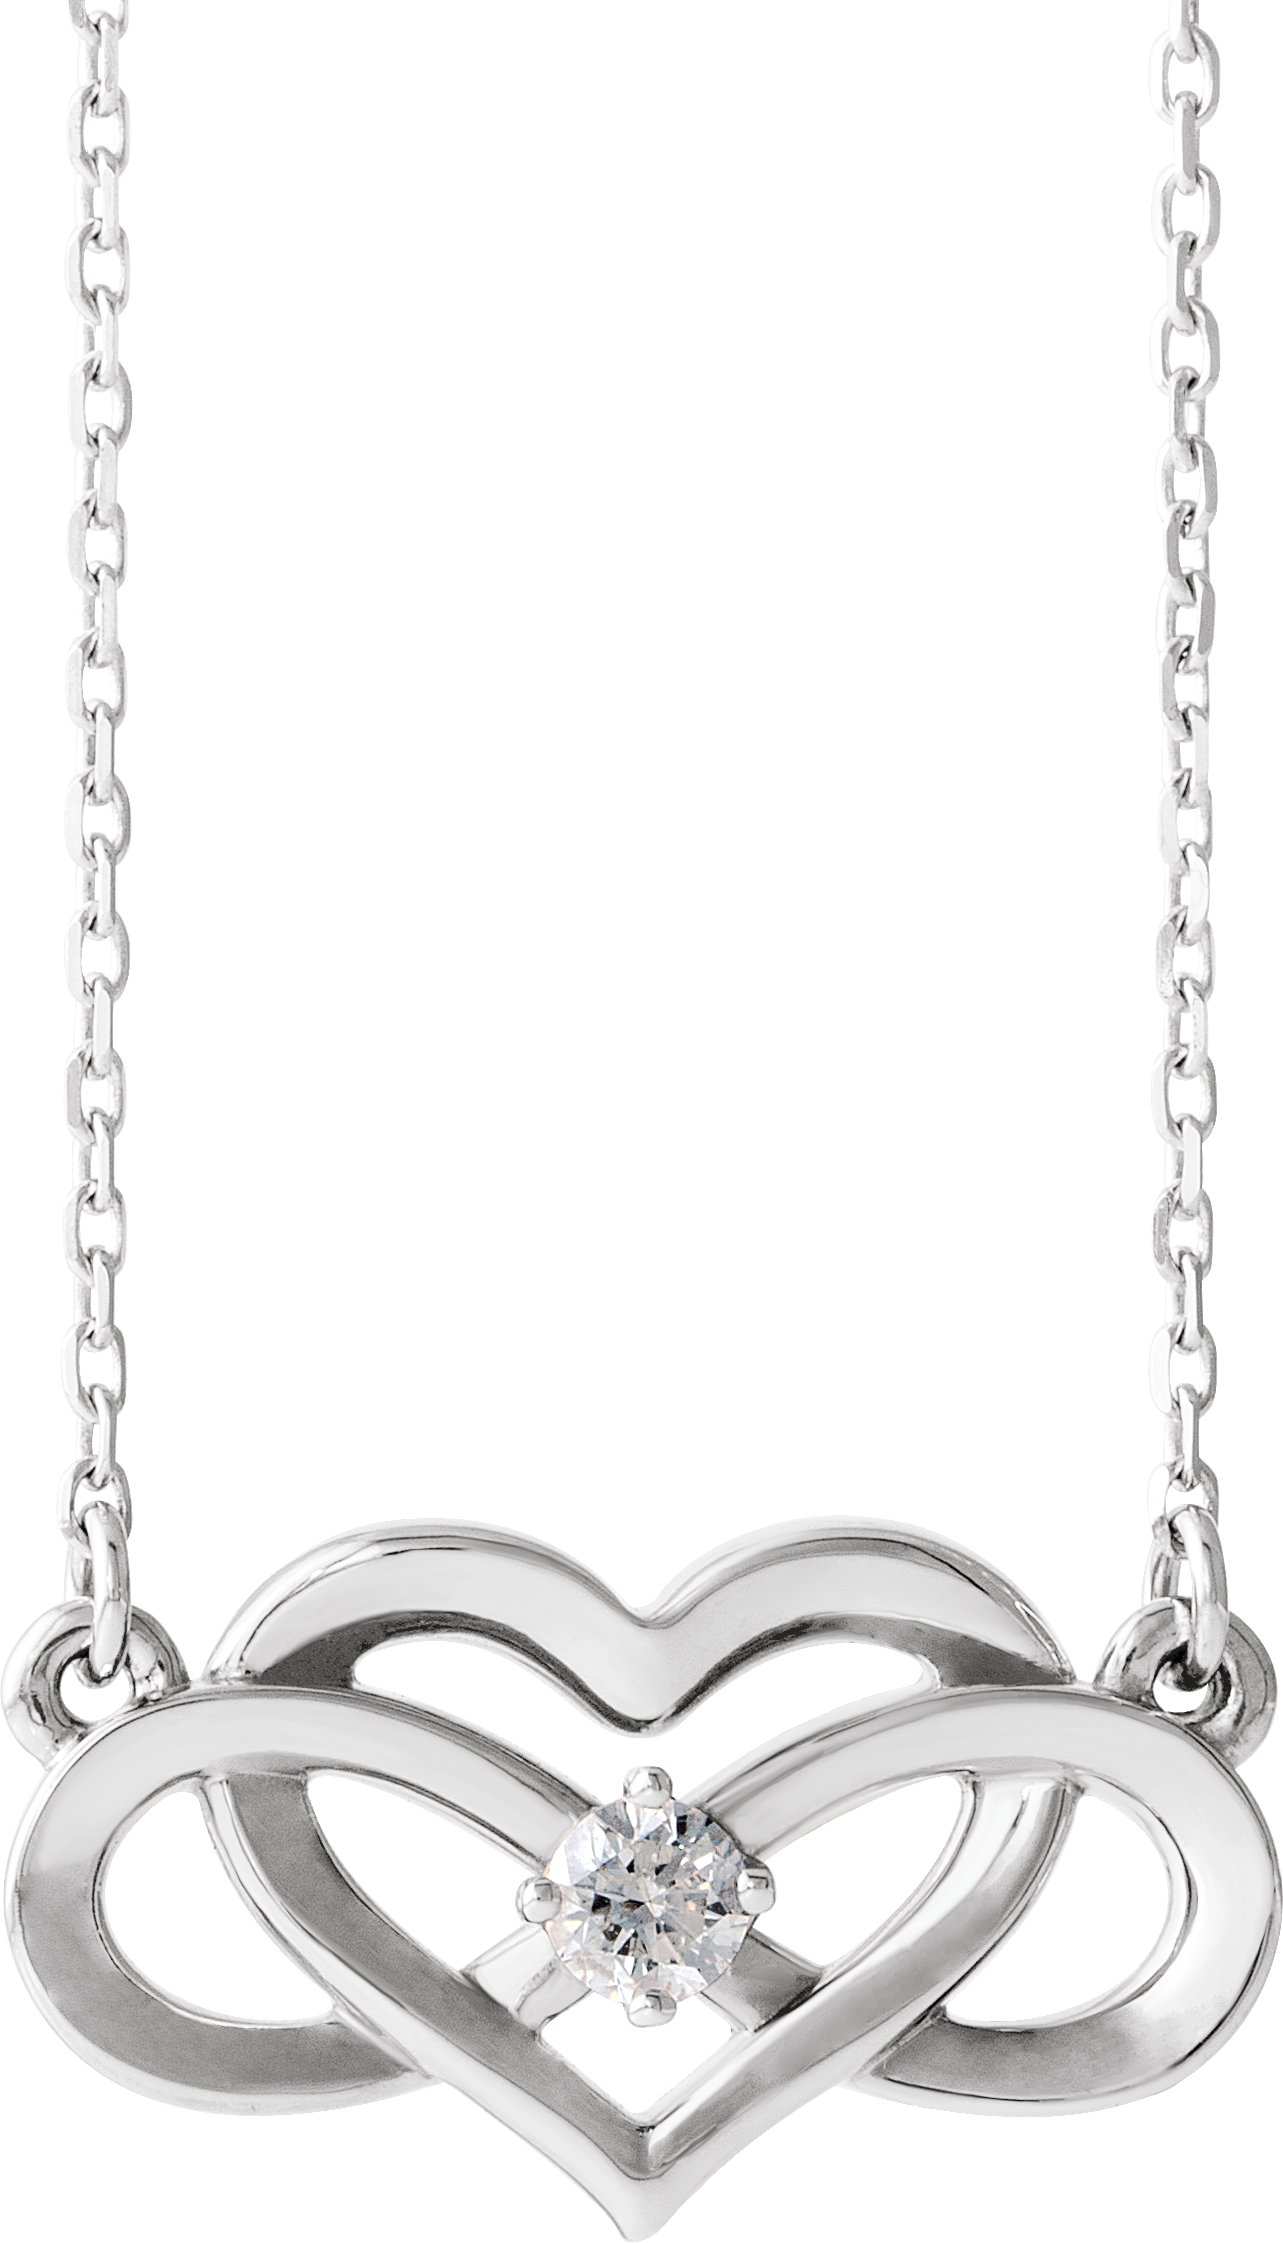 Accented Infinity-Inspired Heart Necklace